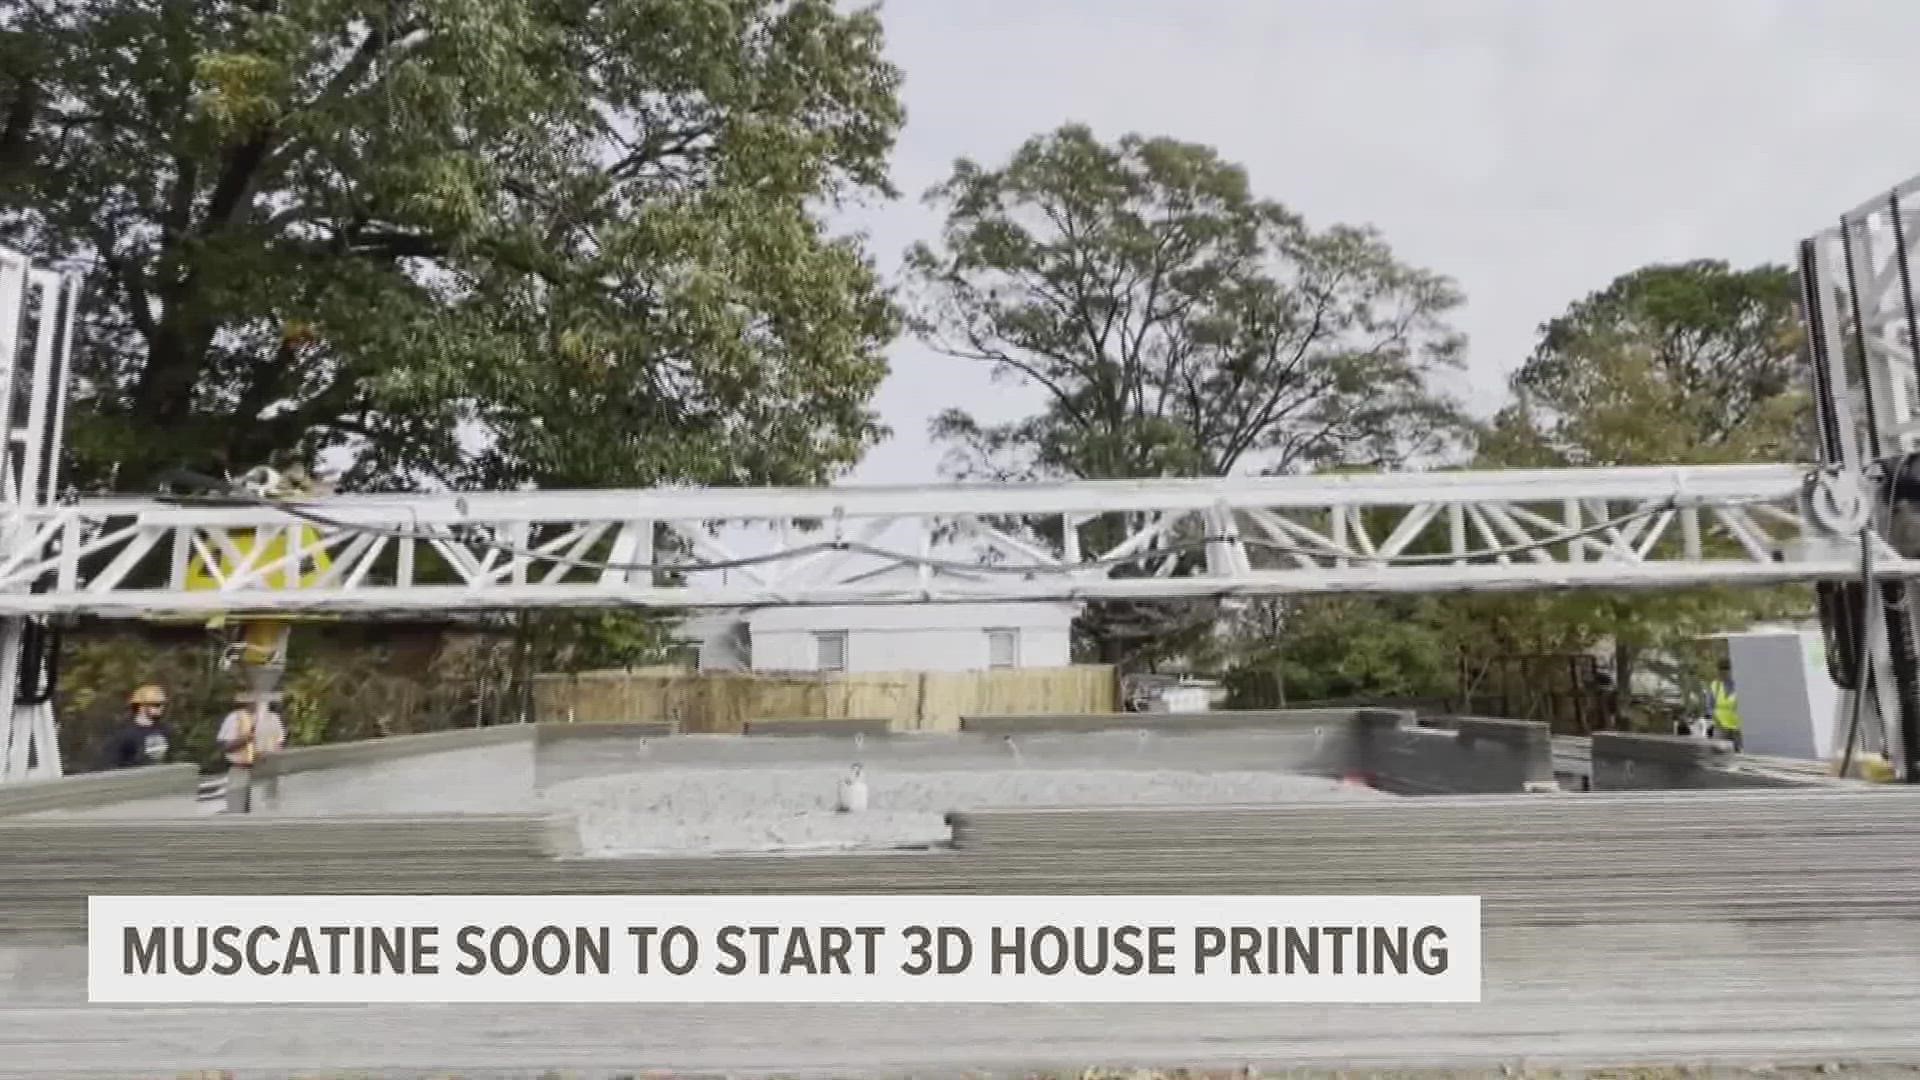 The 3D-printed houses are part of the City's broader effort to boost housing quality in the community.